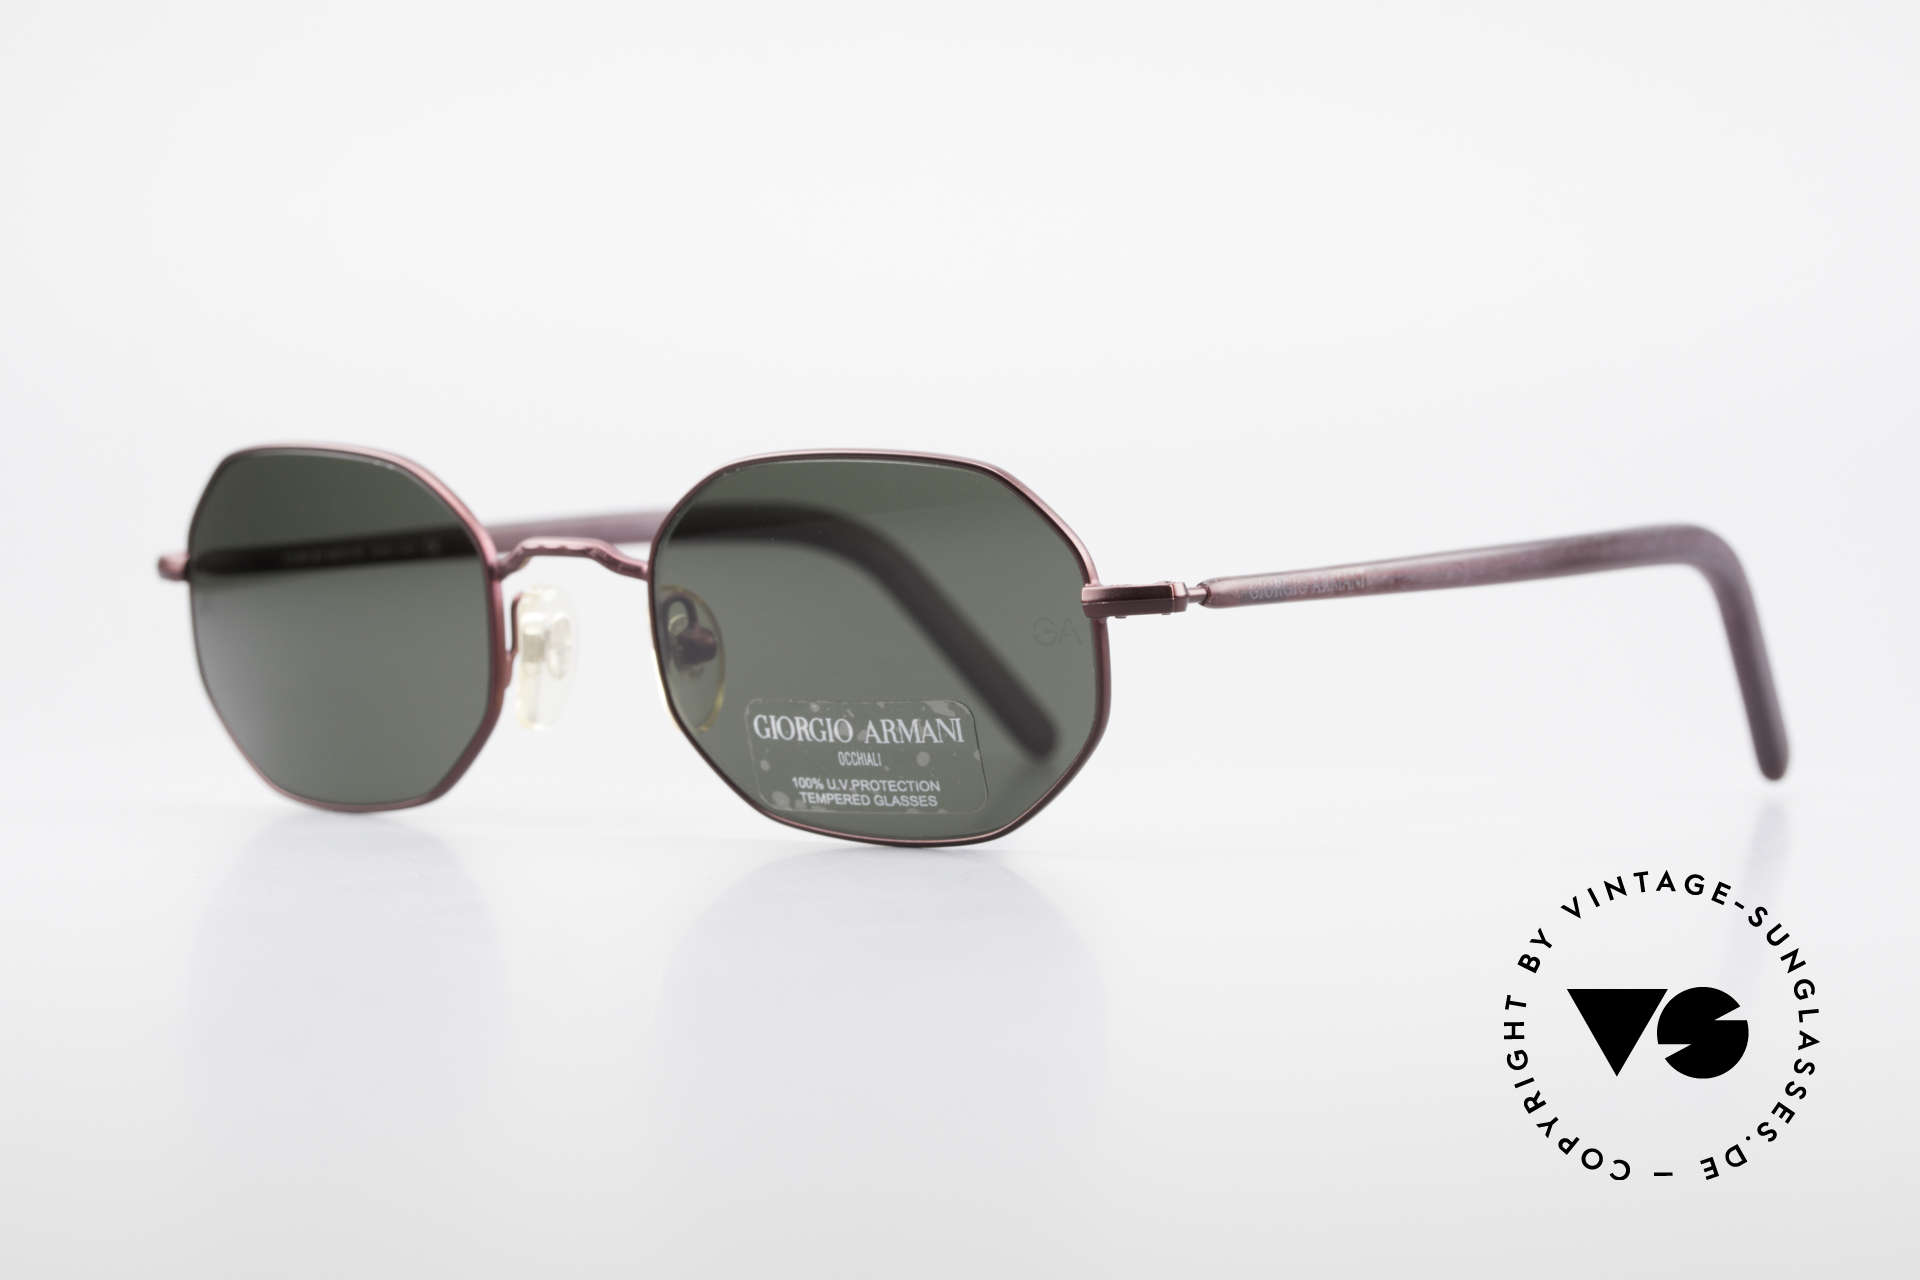 Giorgio Armani 664 Octagonal Vintage Sunglasses, mineral lenses (100% UV prot.) with GA engravings, Made for Men and Women